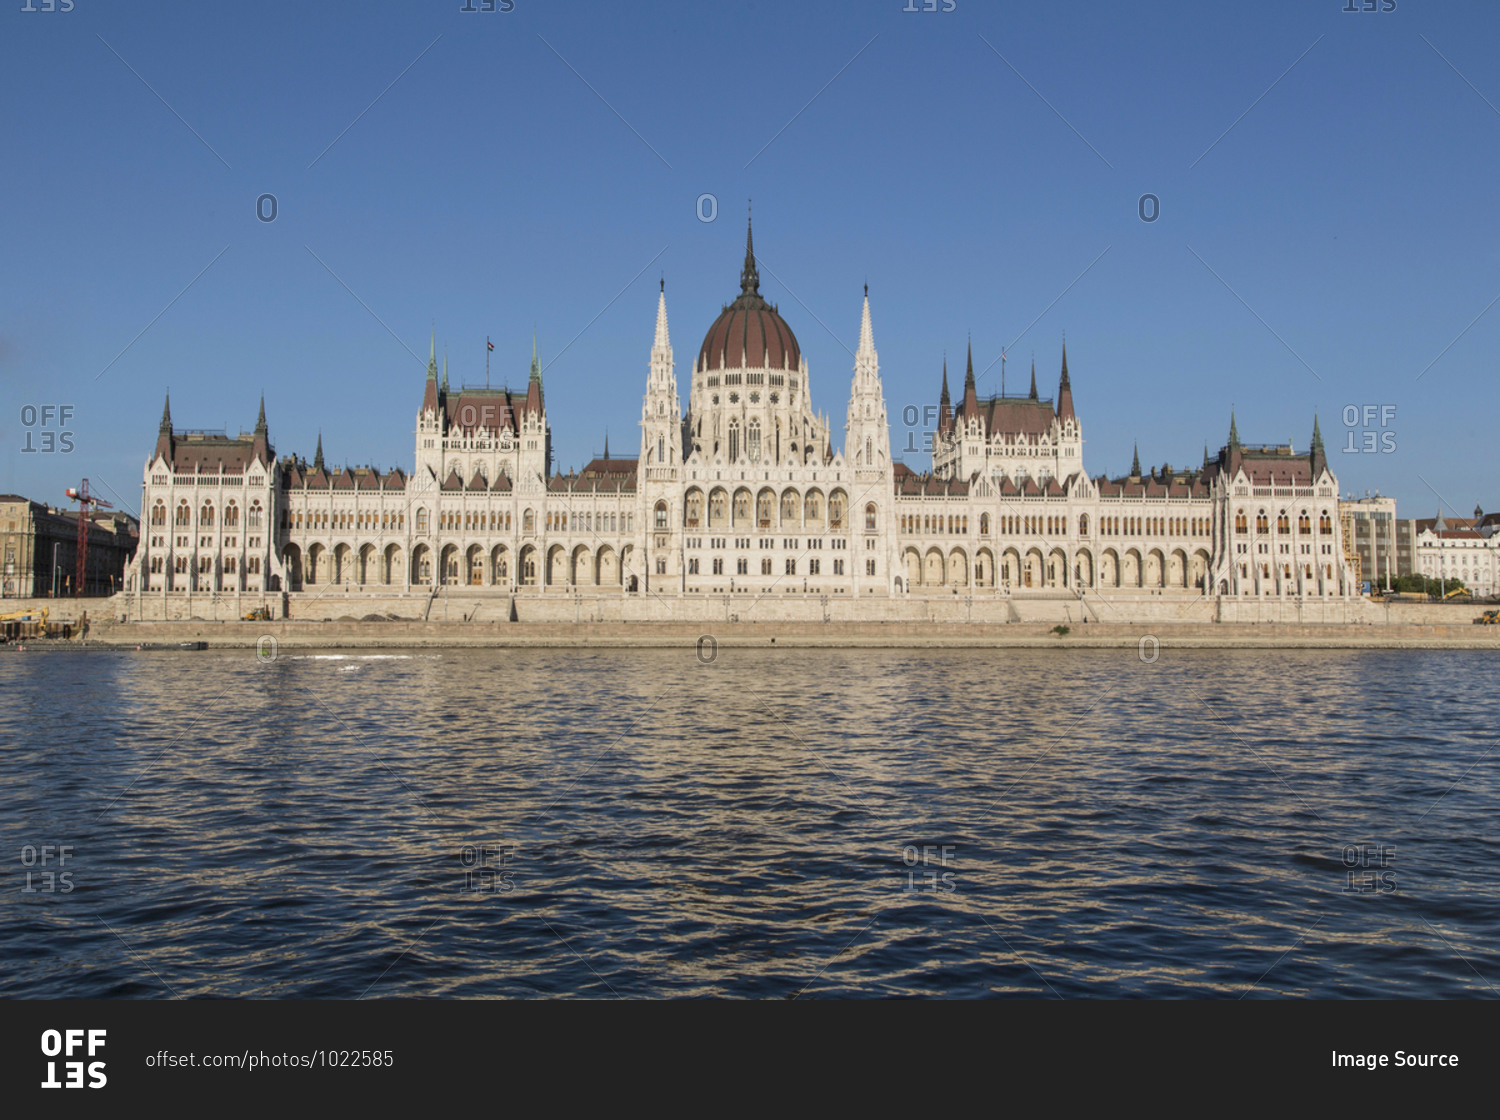 Hungarian Parliament and Danube River, Budapest, Hungary